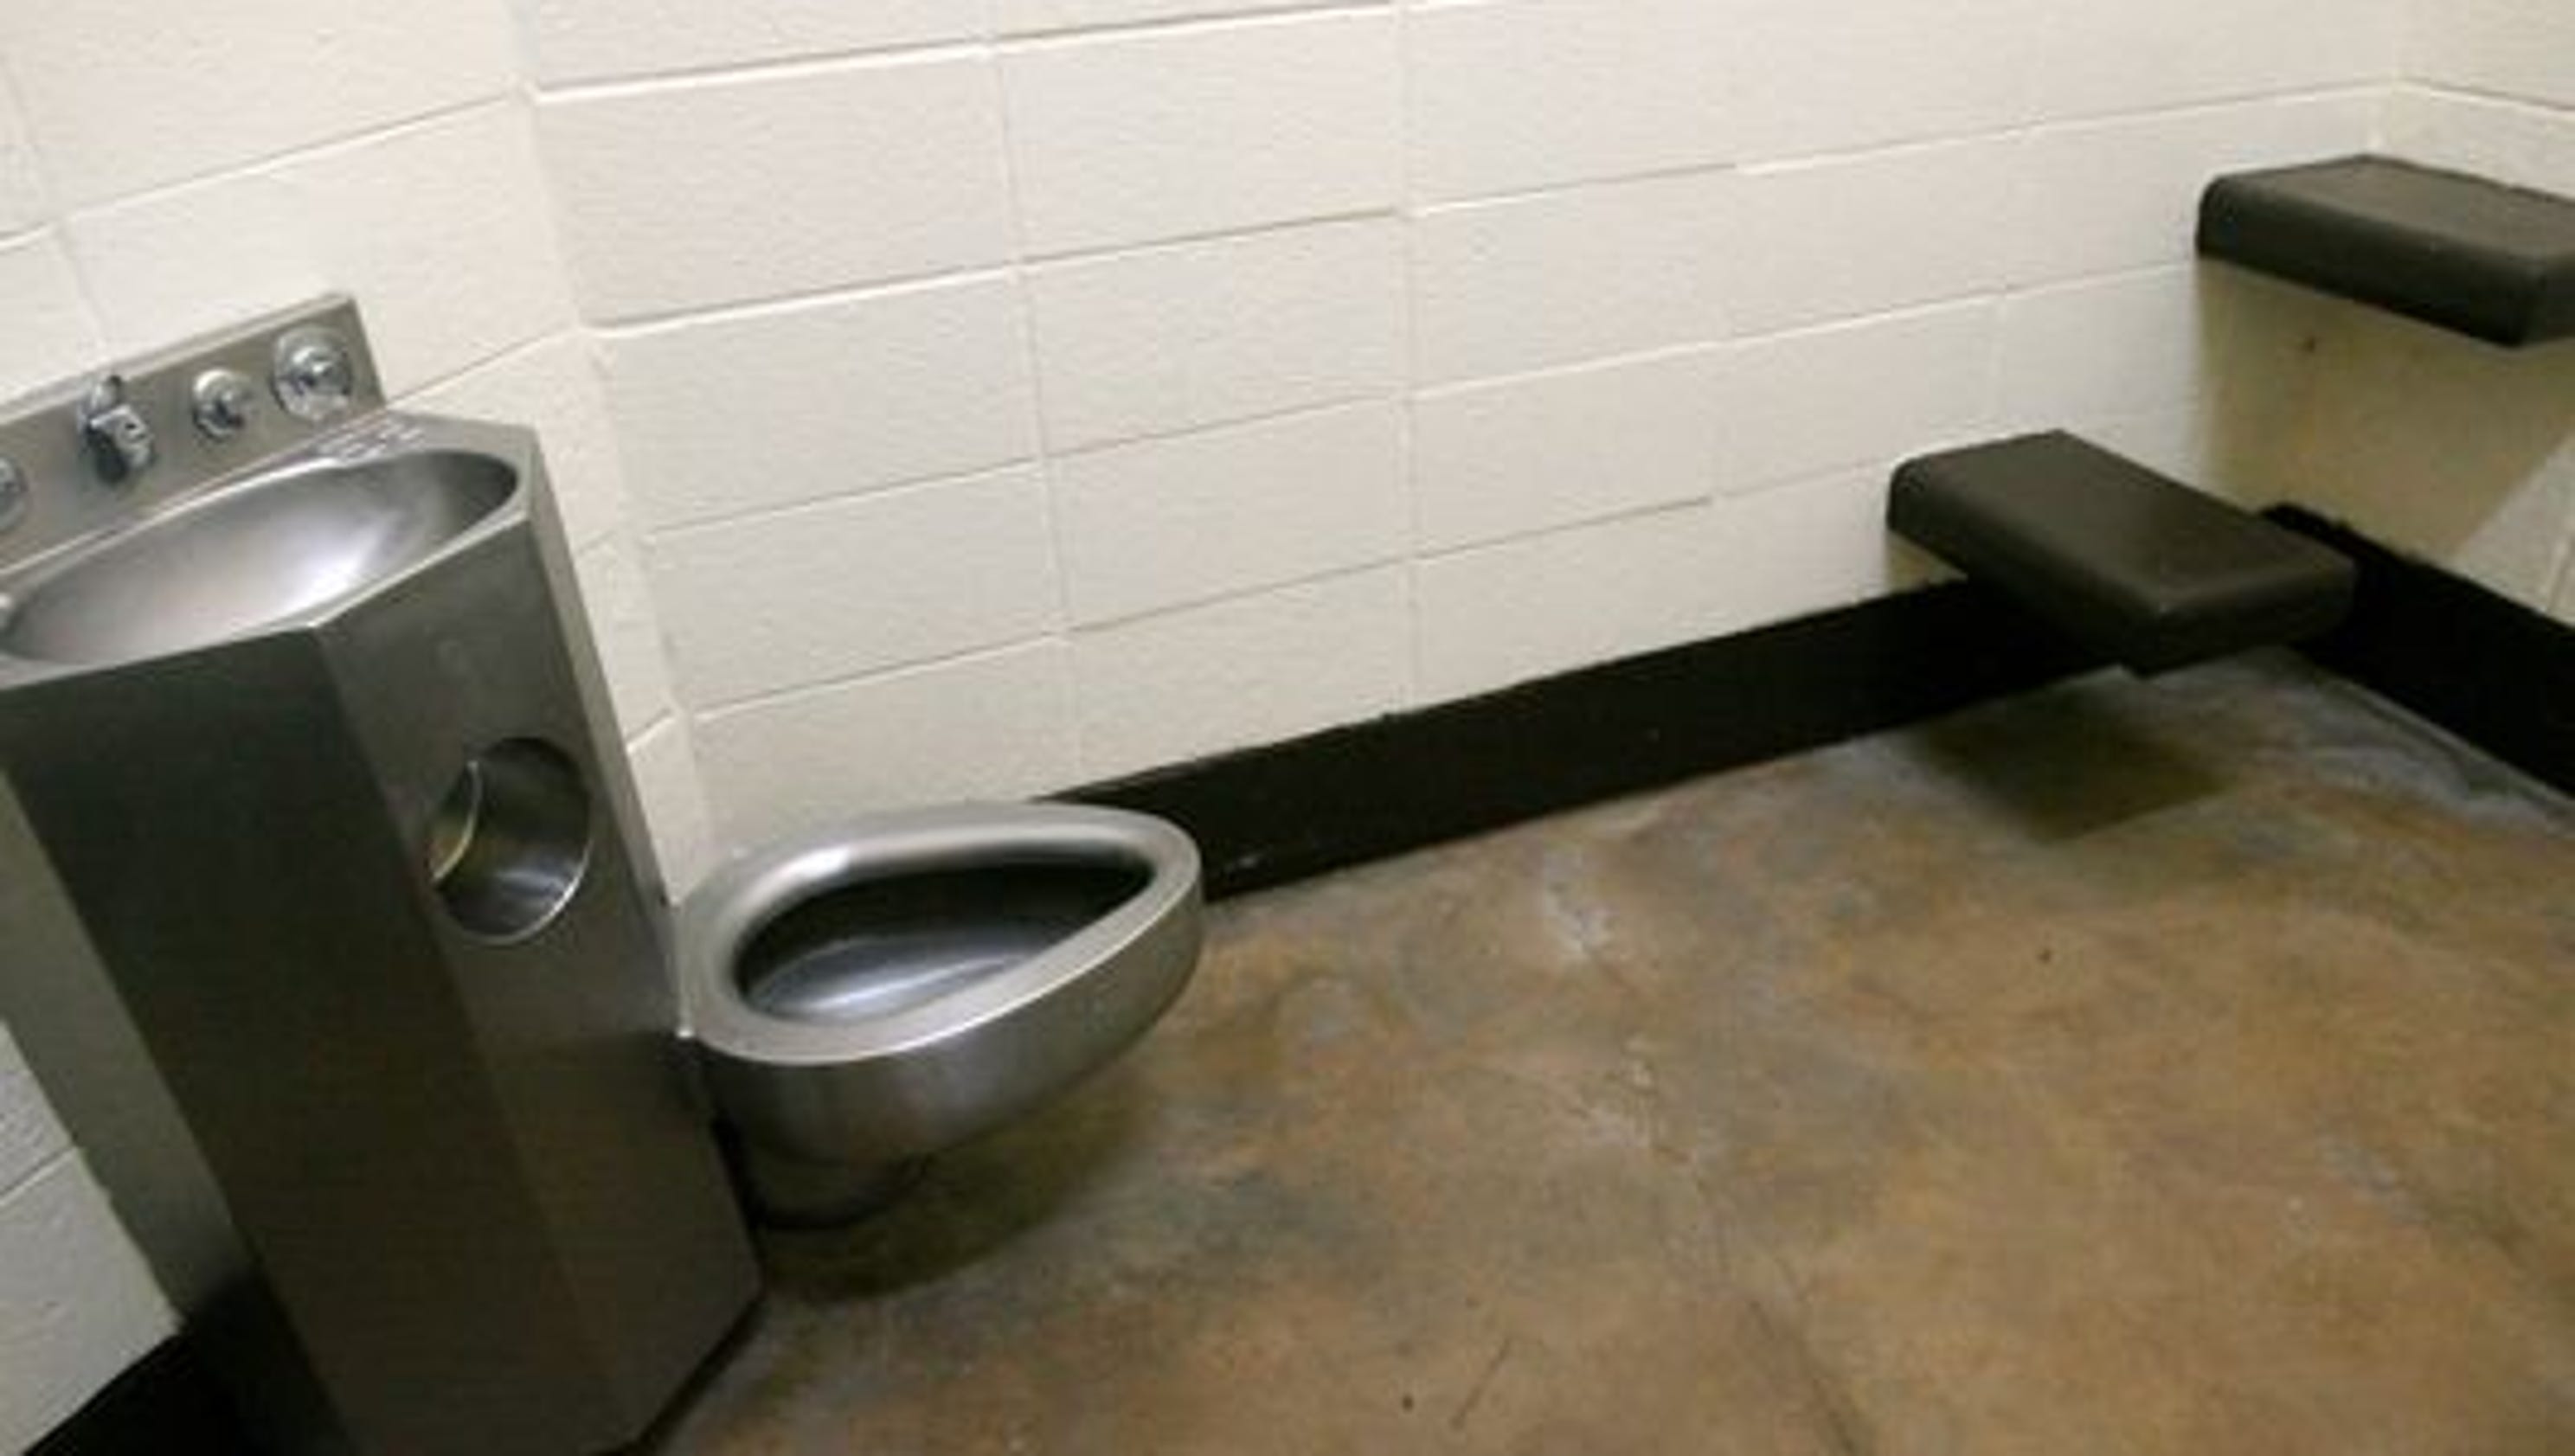 Fifty Lawsuits Have Now Been Filed Over Riverside County Jail Toilets One Prisoner Started It All 